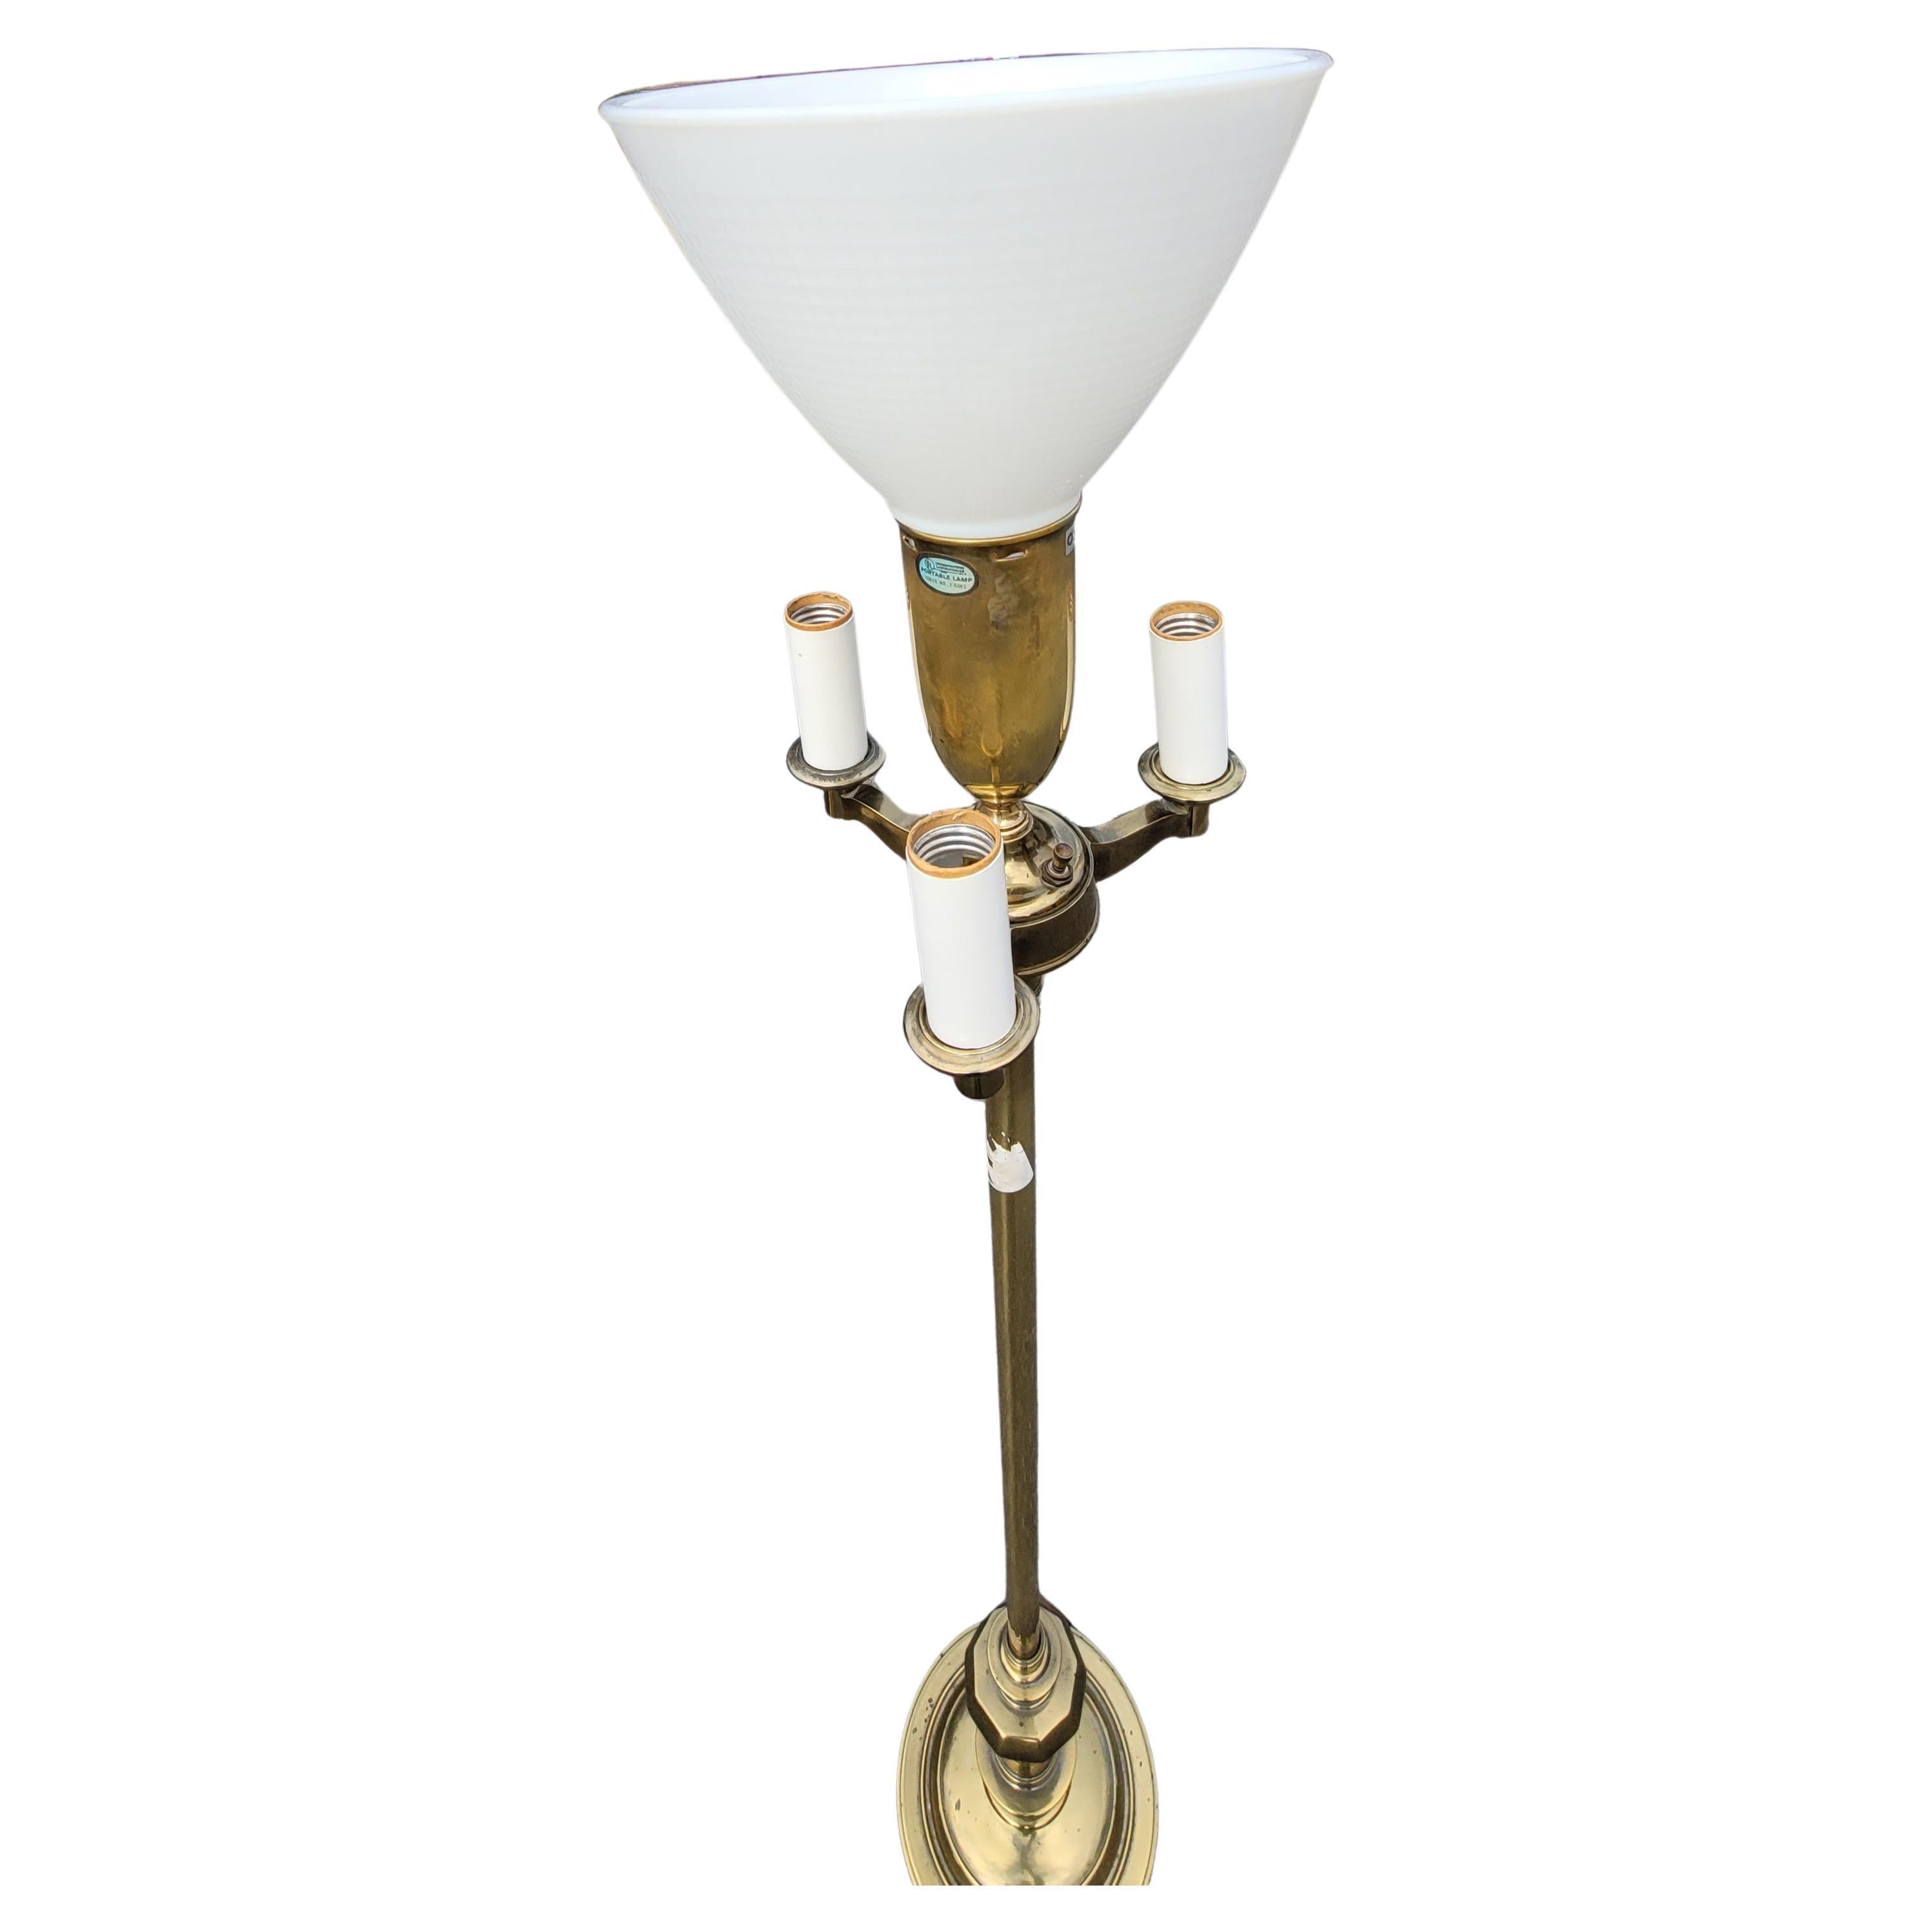 A 1970s Stiffel Torchiere brass floor lamp with milk glass shade. Features 3 peripheral lights and Center light. Great quality. Measures 10